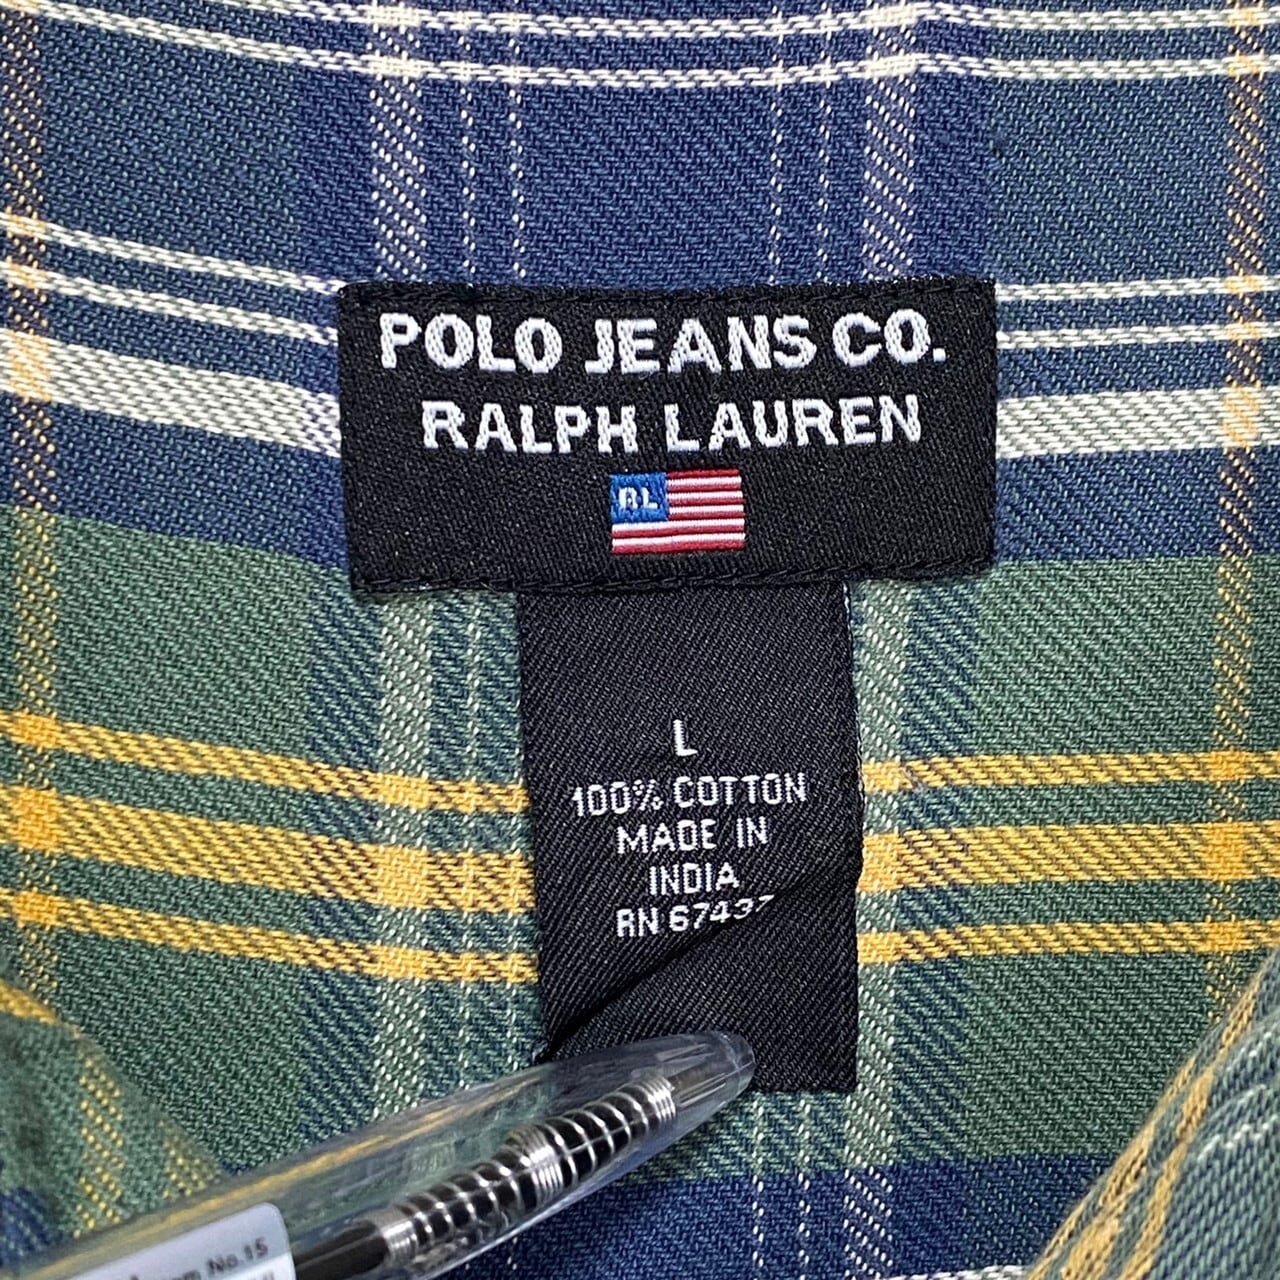 POLO JEANS CO.　チェック柄 シャツ　100